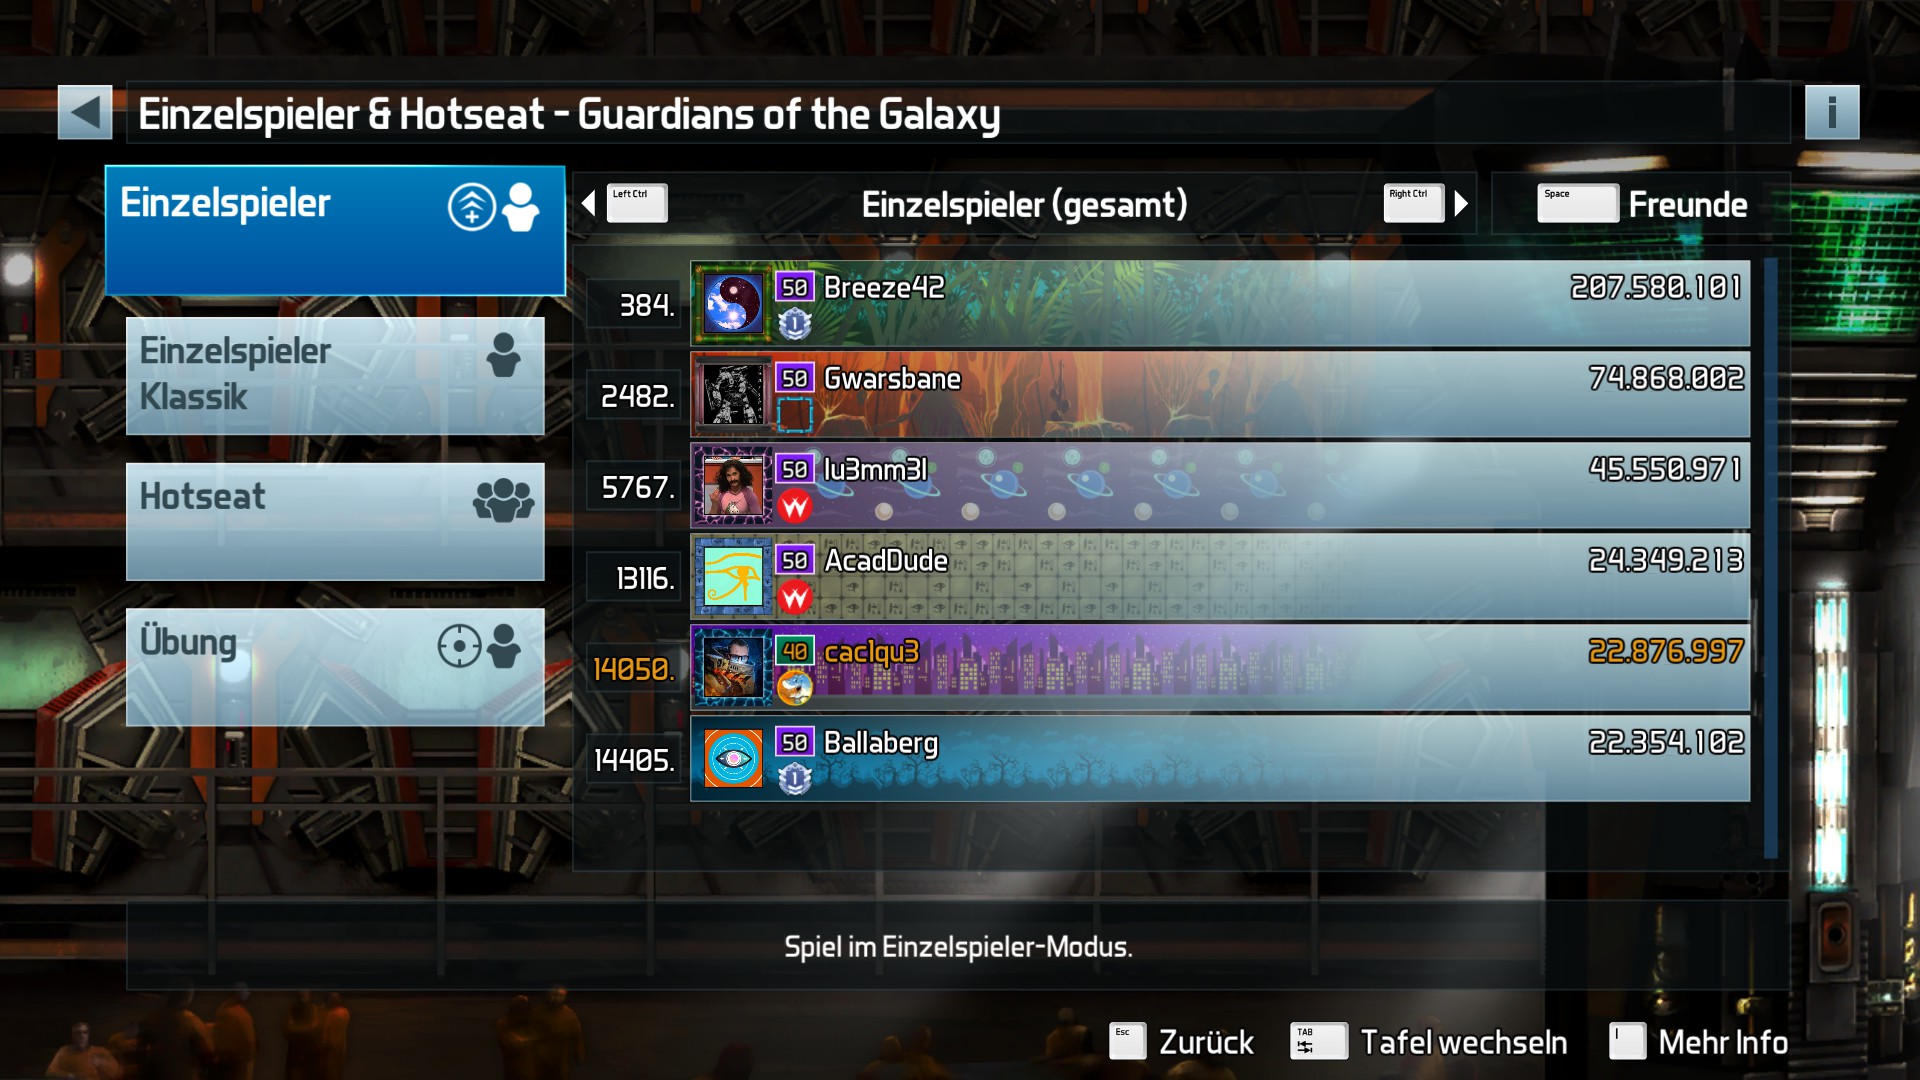 e2e4: Pinball FX3: Marvel’s Guardians of the Galaxy (PC) 22,876,997 points on 2022-05-16 09:07:46